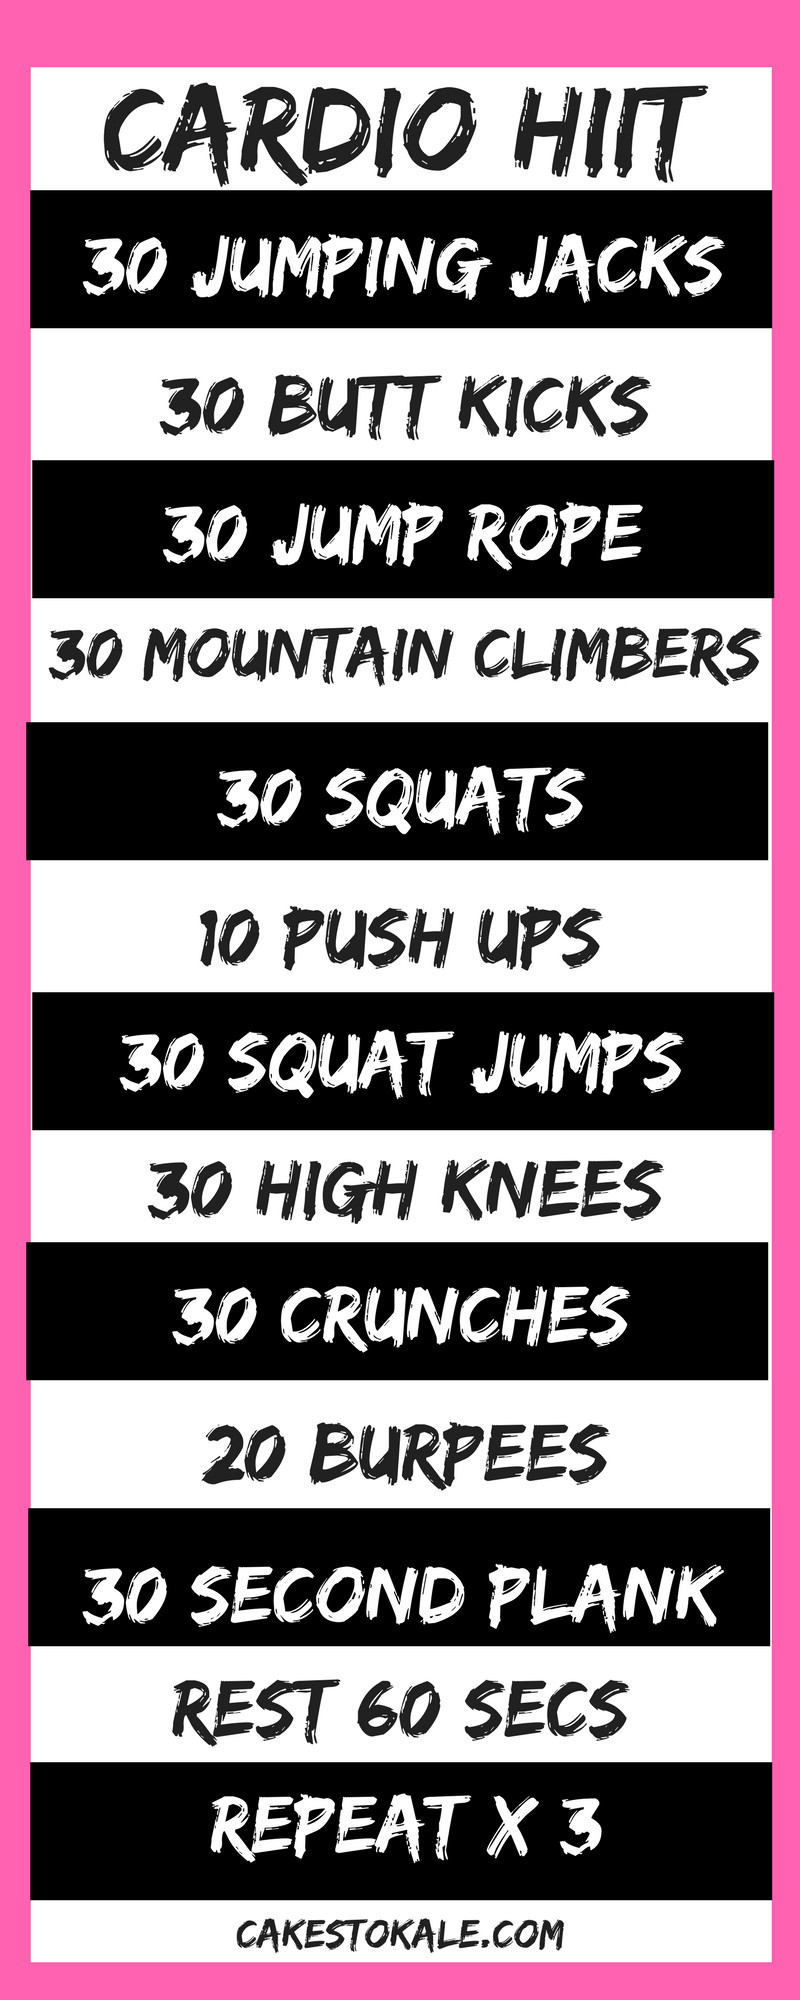 Daily Fat Burning Workout
 Pin on HIIT Exercise Workouts